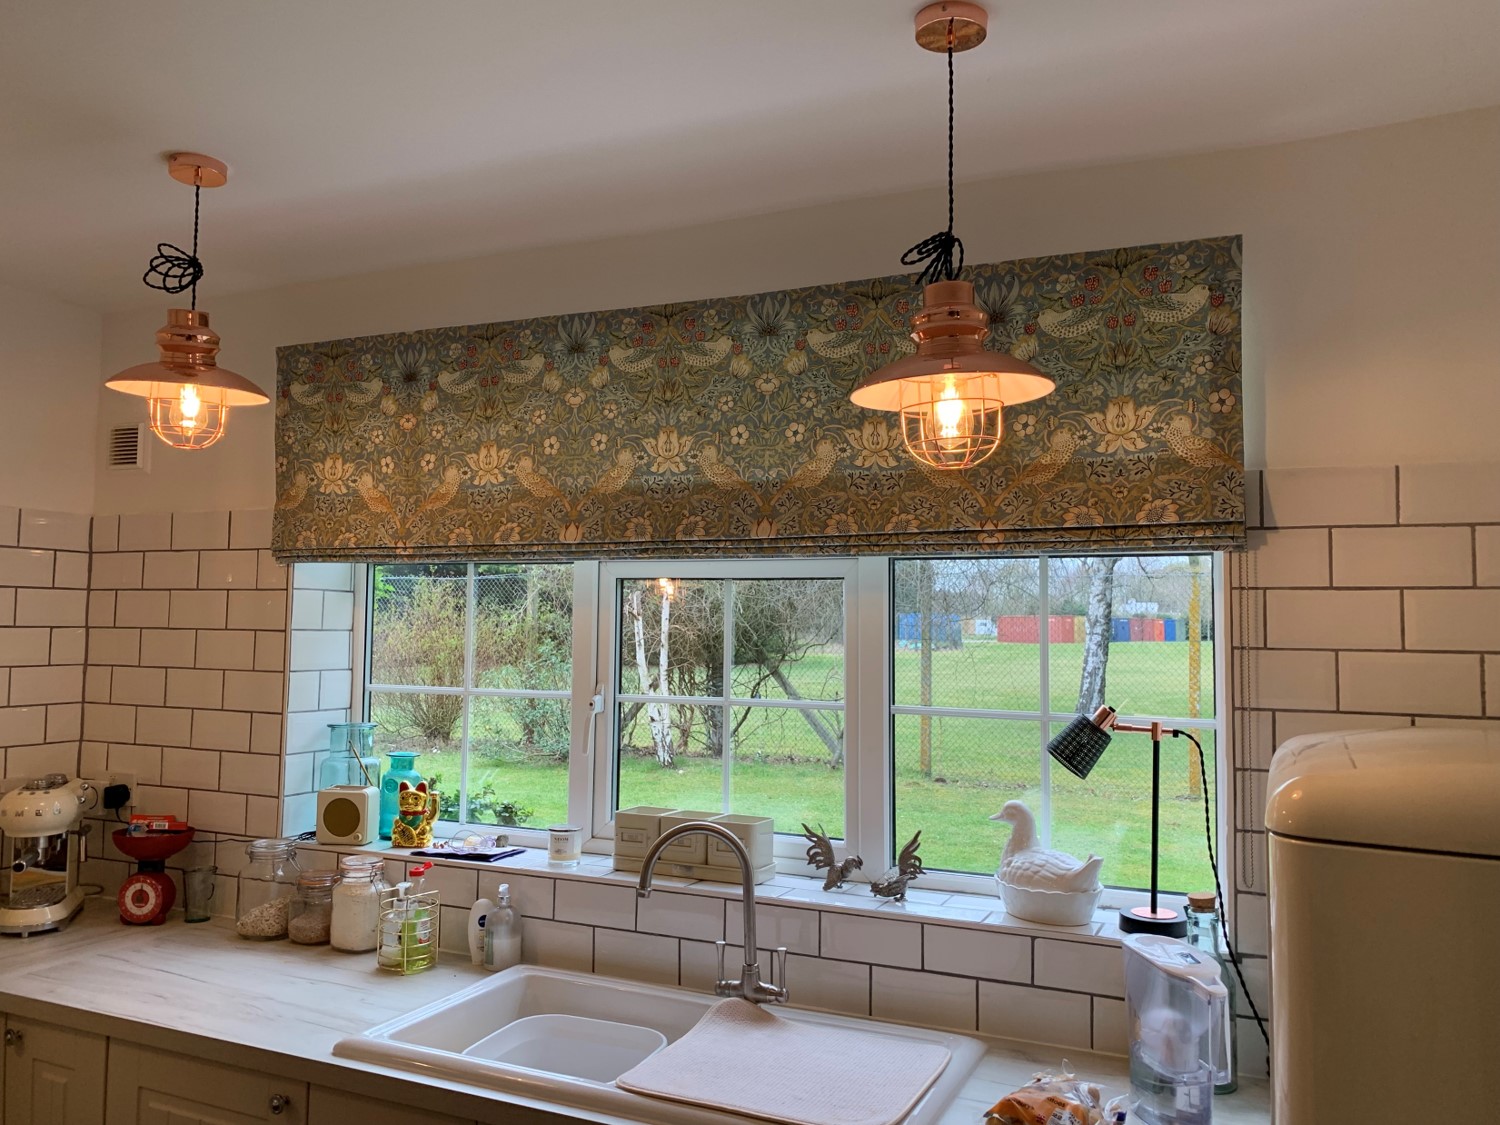 Roman Blinds traditional look for kitchen solutions